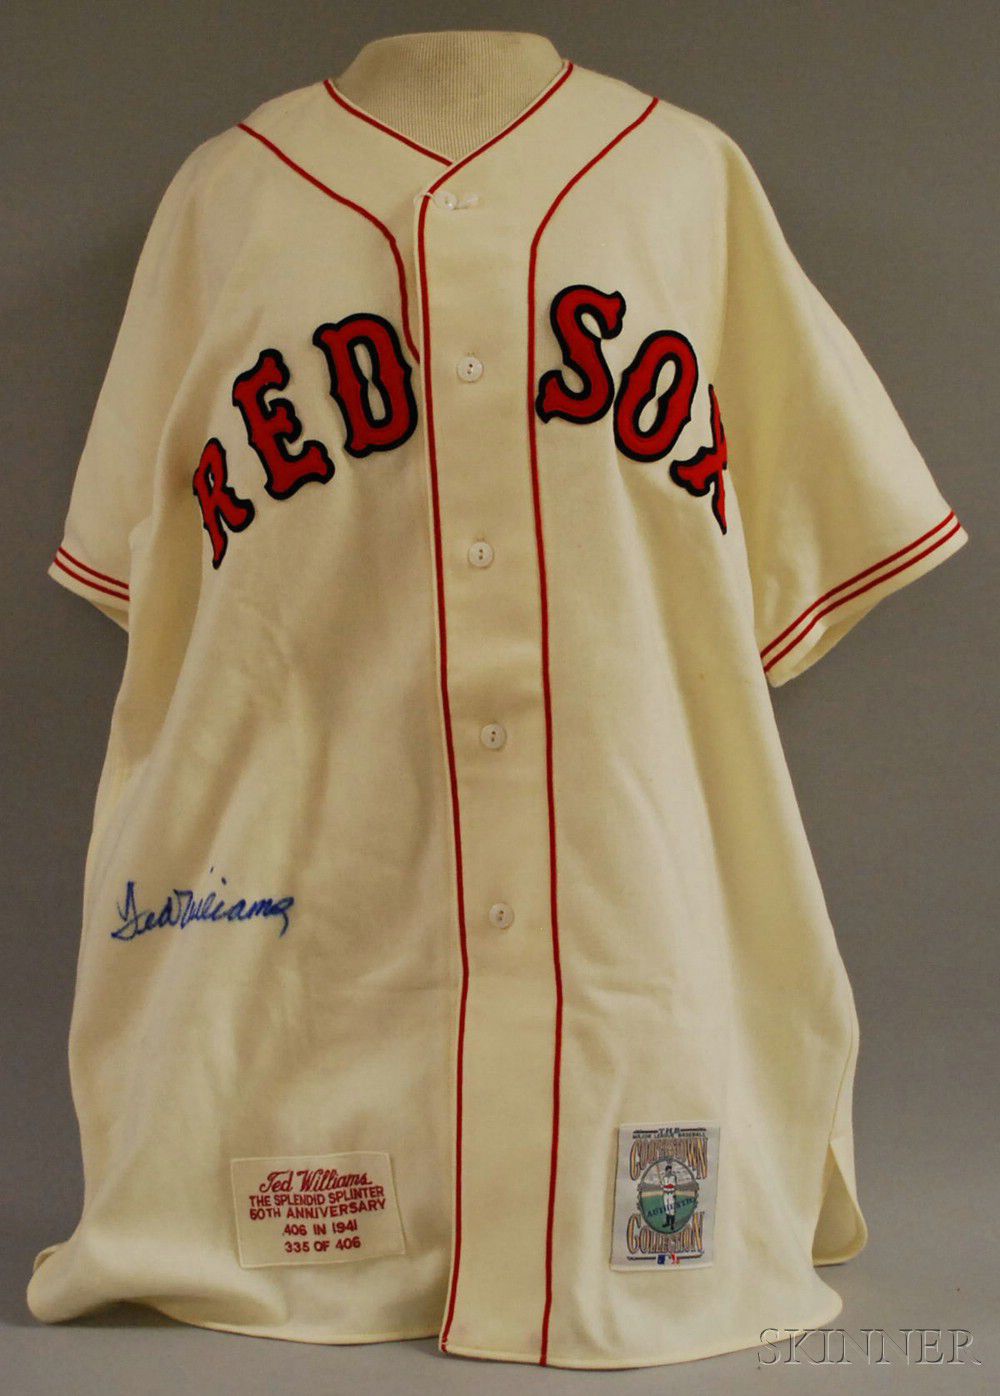 sox mitchell and ness ted williams